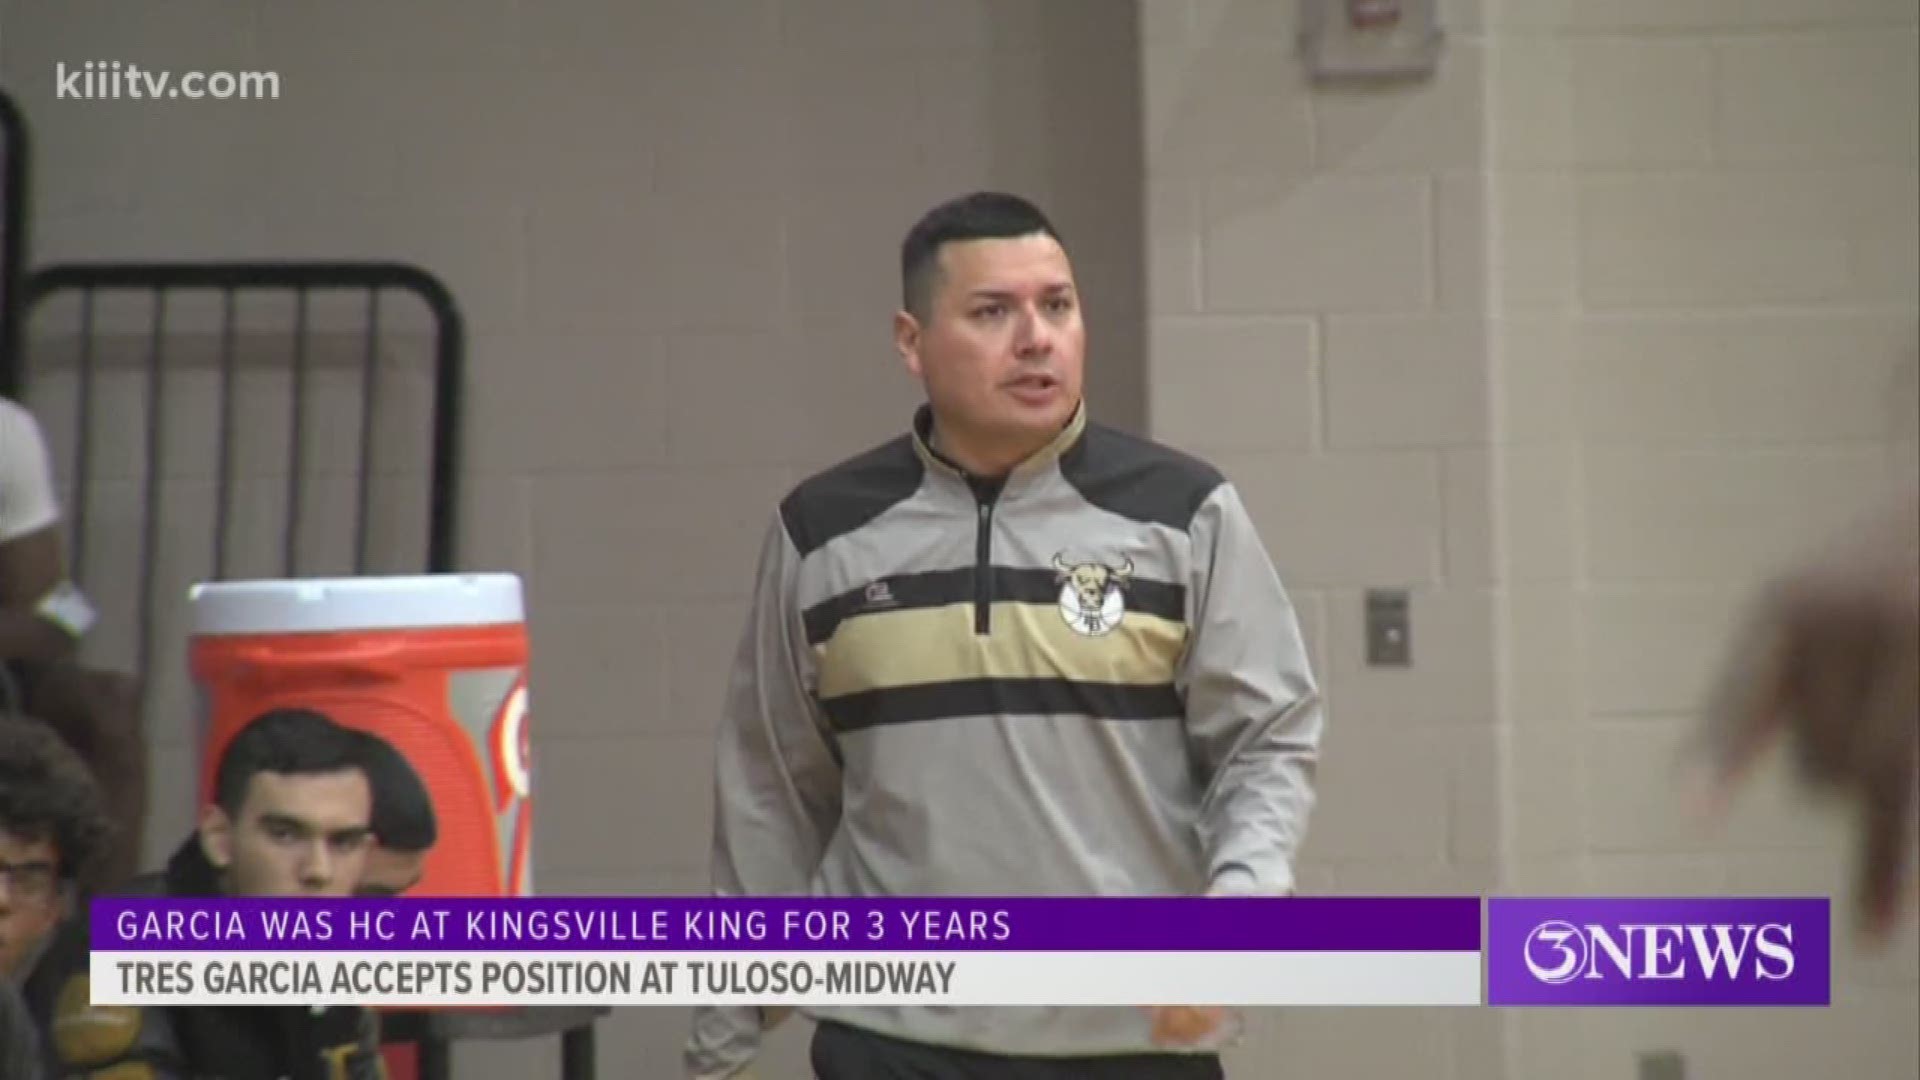 Kingsville King's Tres Garcia has accepted the head coaching position at Tuloso-Midway for boys basketball.